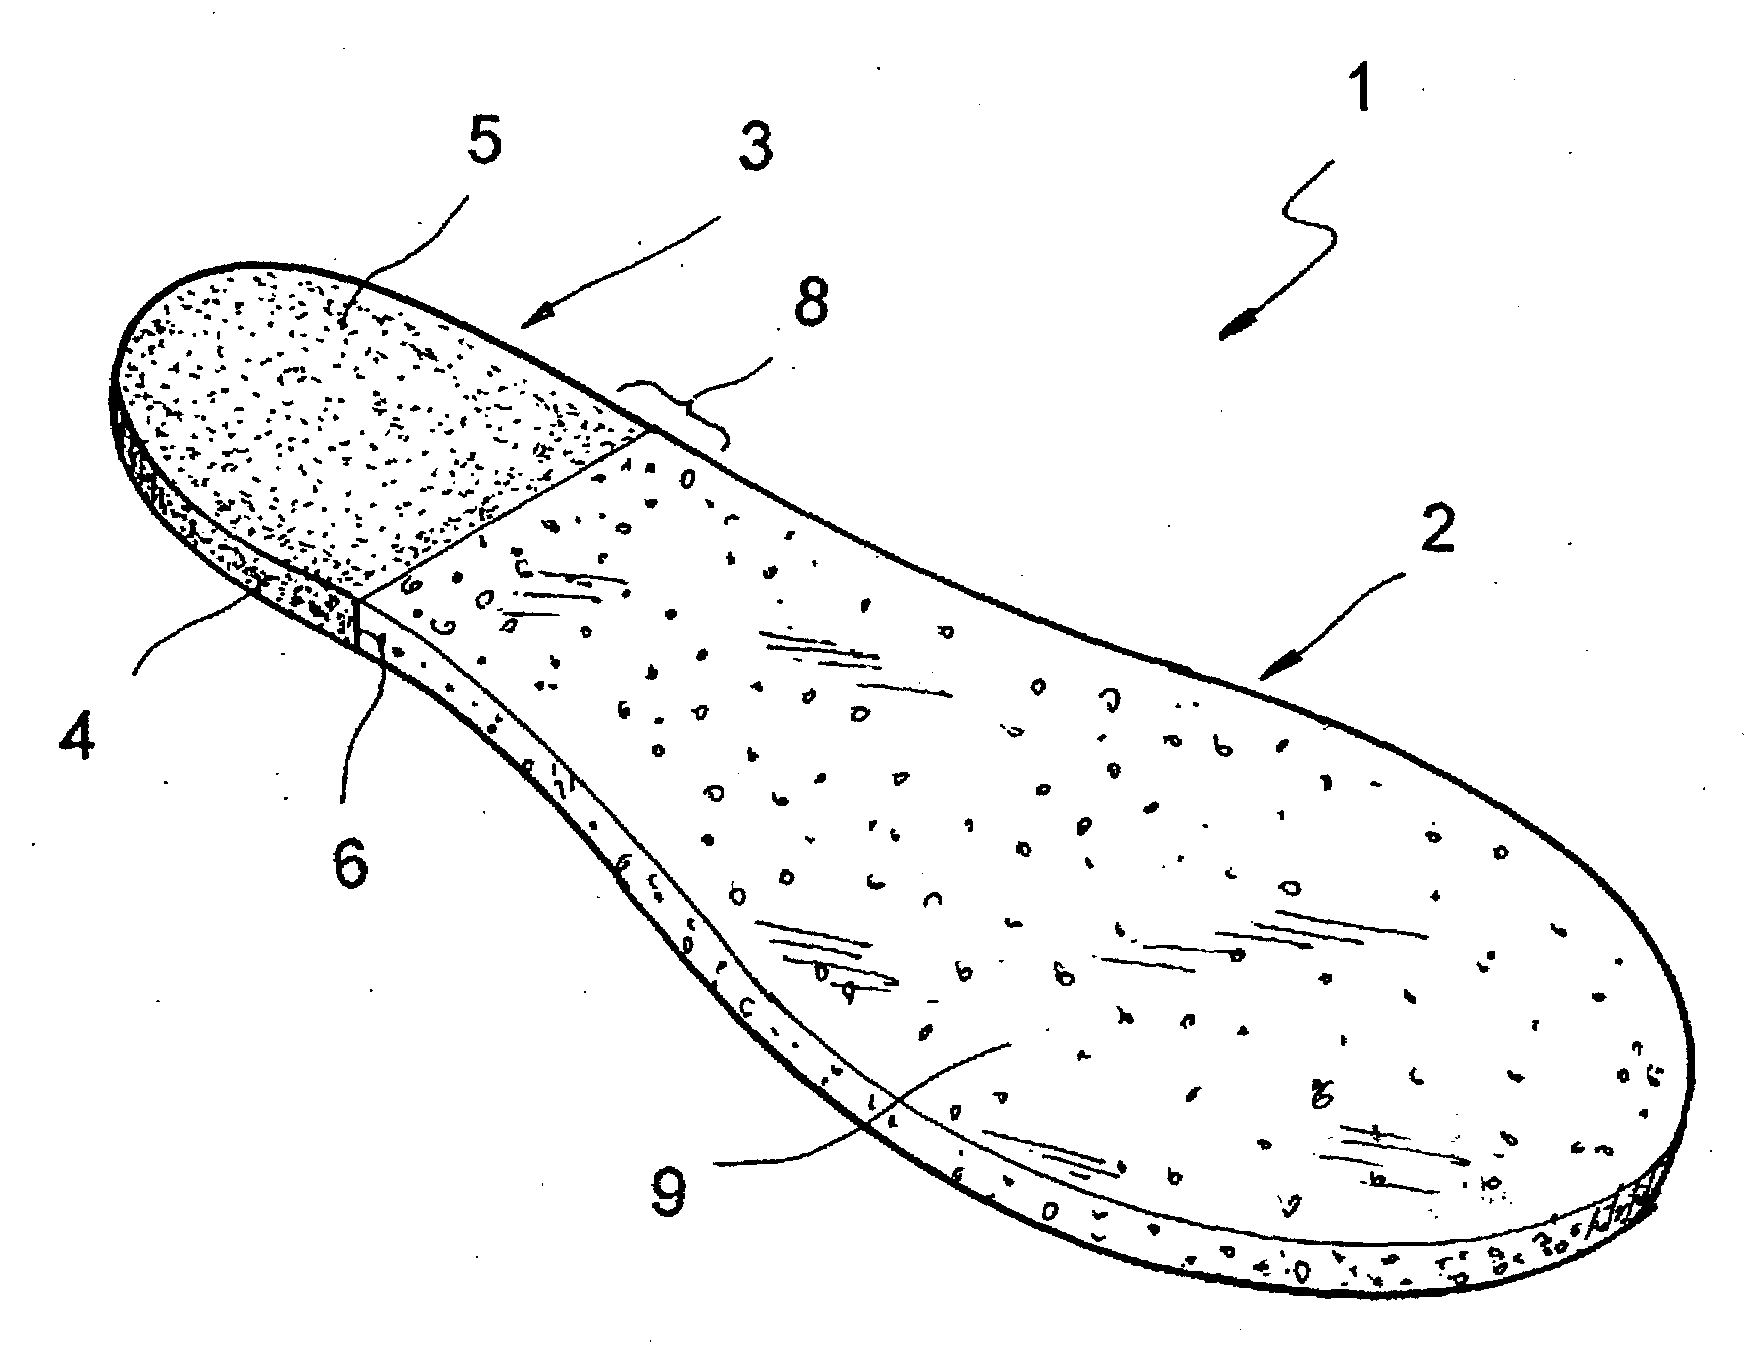 Composite footwear insole, and method of manufacturing same